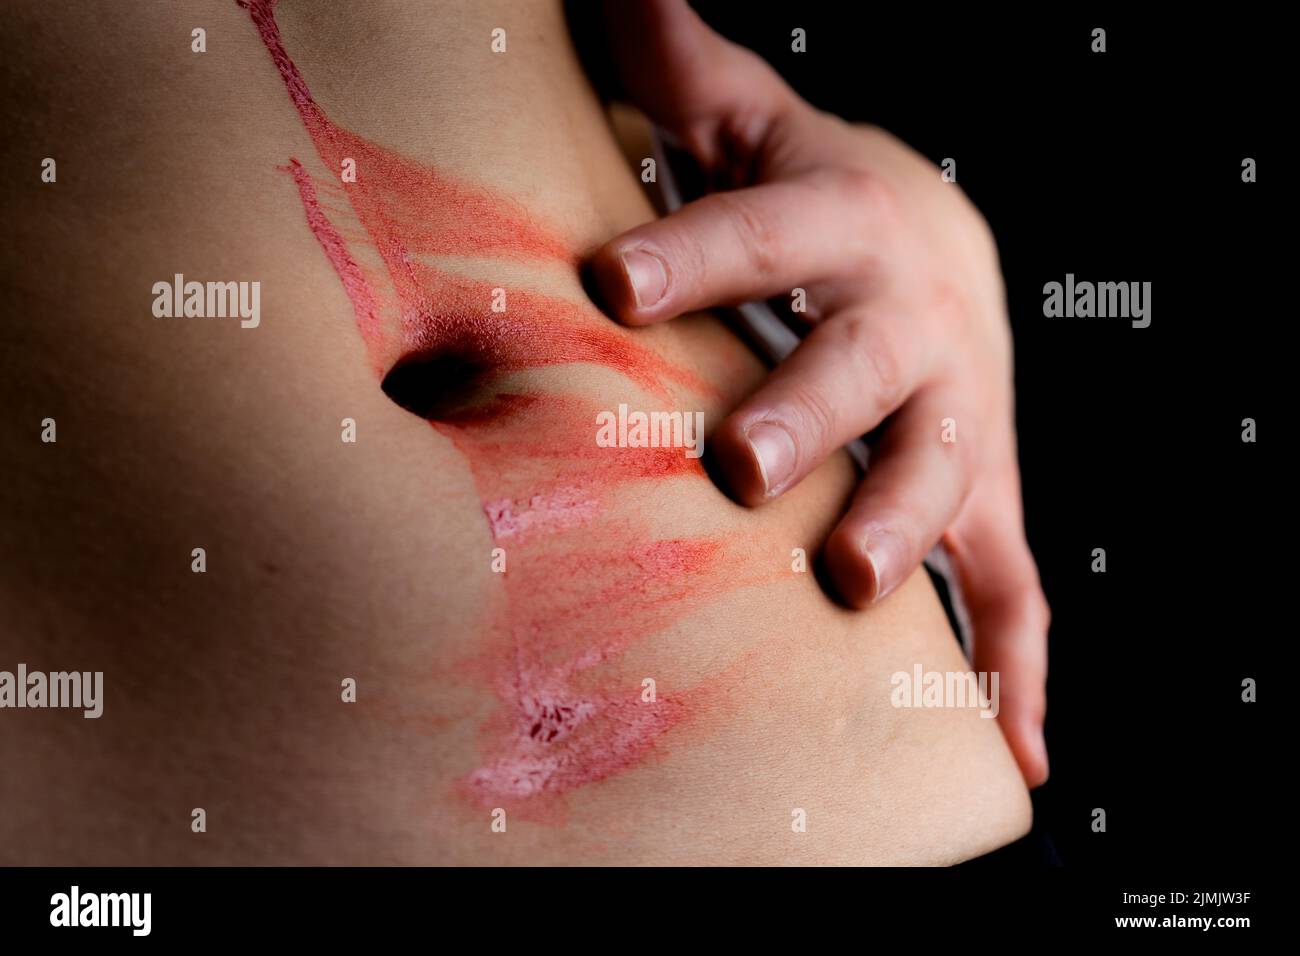 Drop of blood on female body. Hand smearing red liquid flowing on and off belly button. Stock Photo